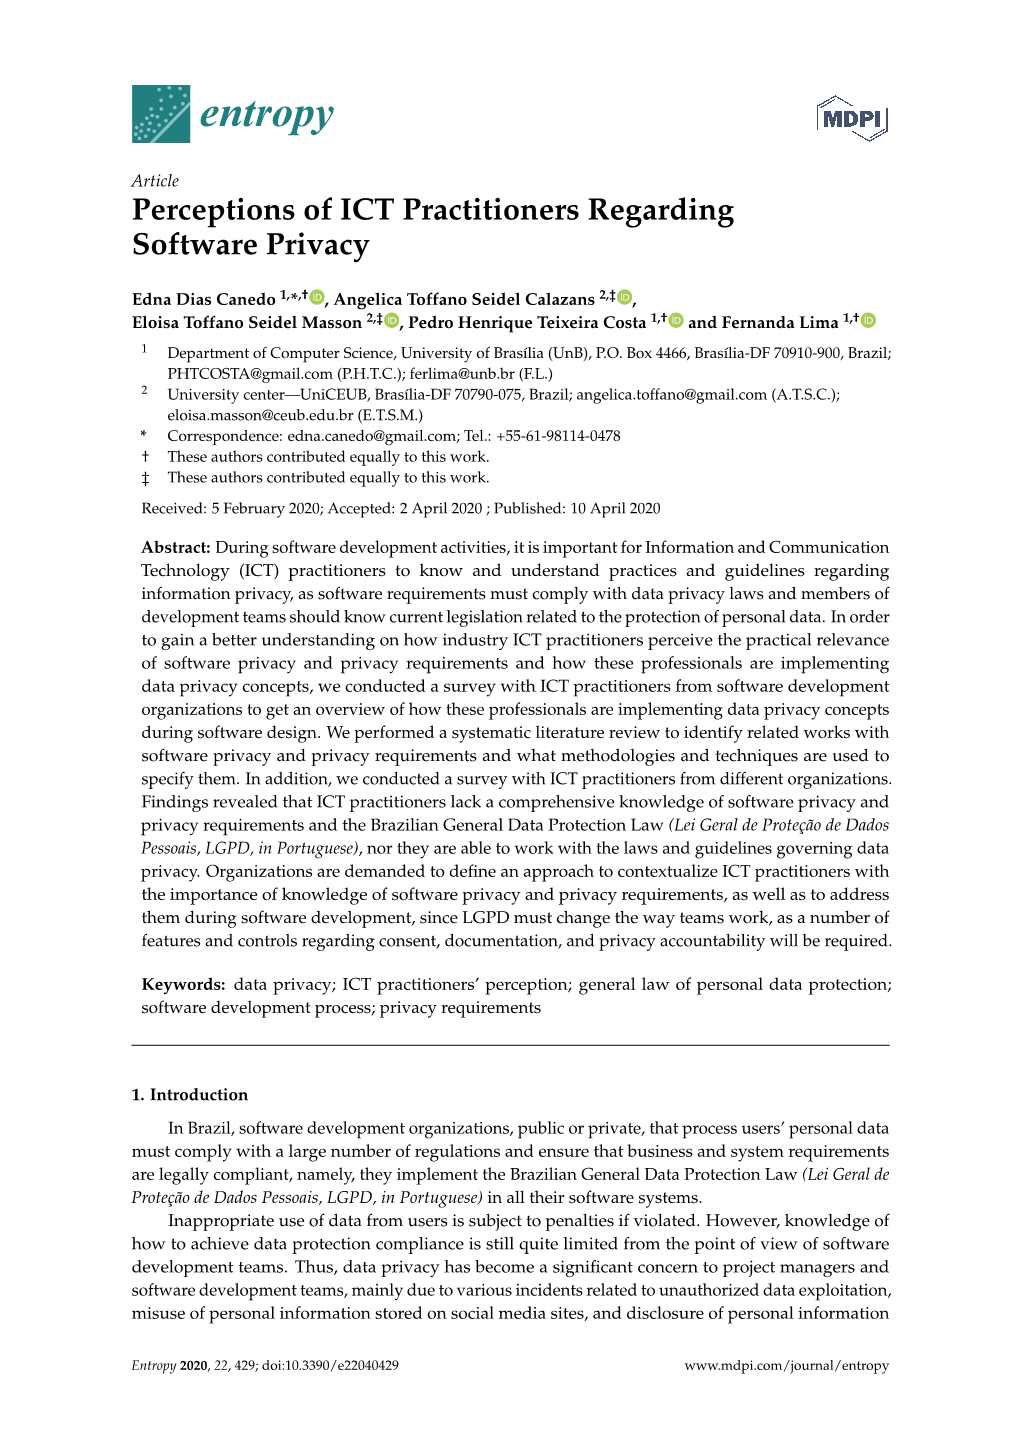 Perceptions of ICT Practitioners Regarding Software Privacy